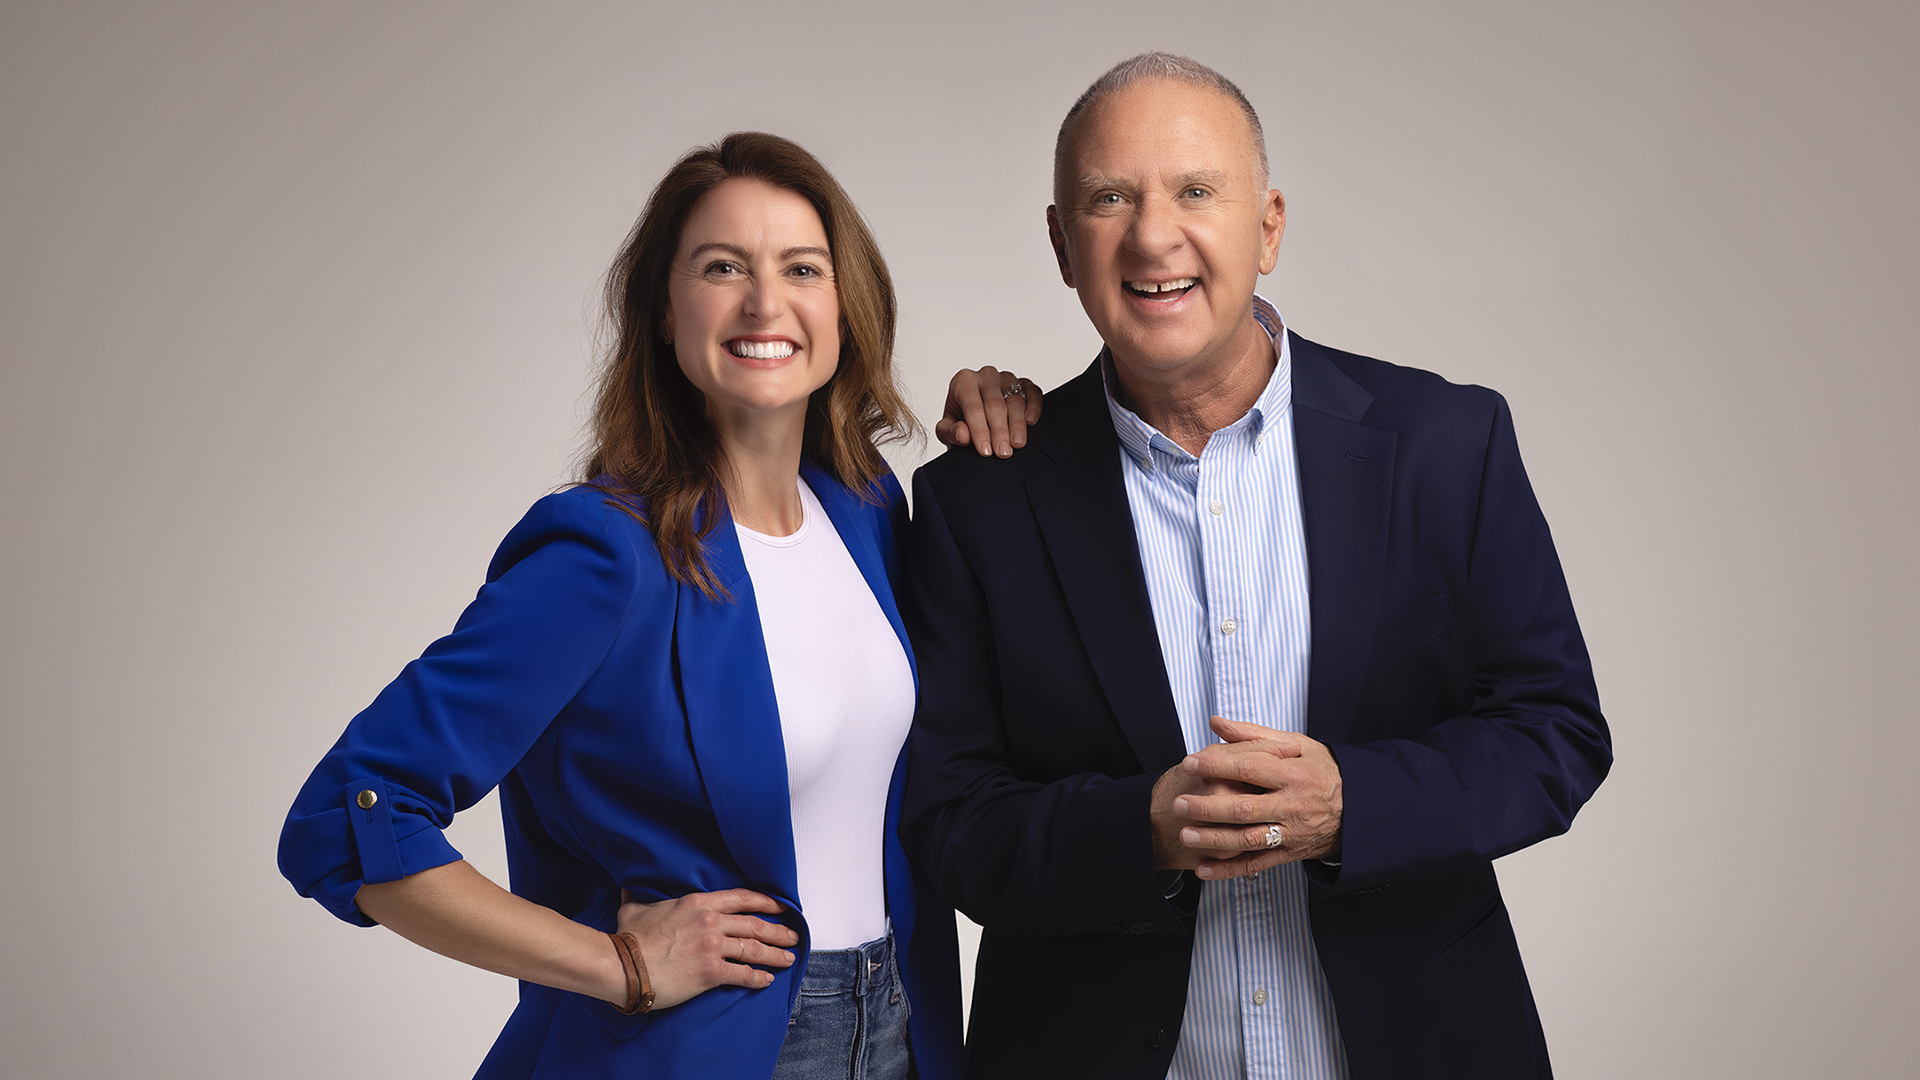 Emmy Fink has her hand on the shoulder of John McGivern, and both wear blazers while standing against a plain gray background and smiling at the camera.